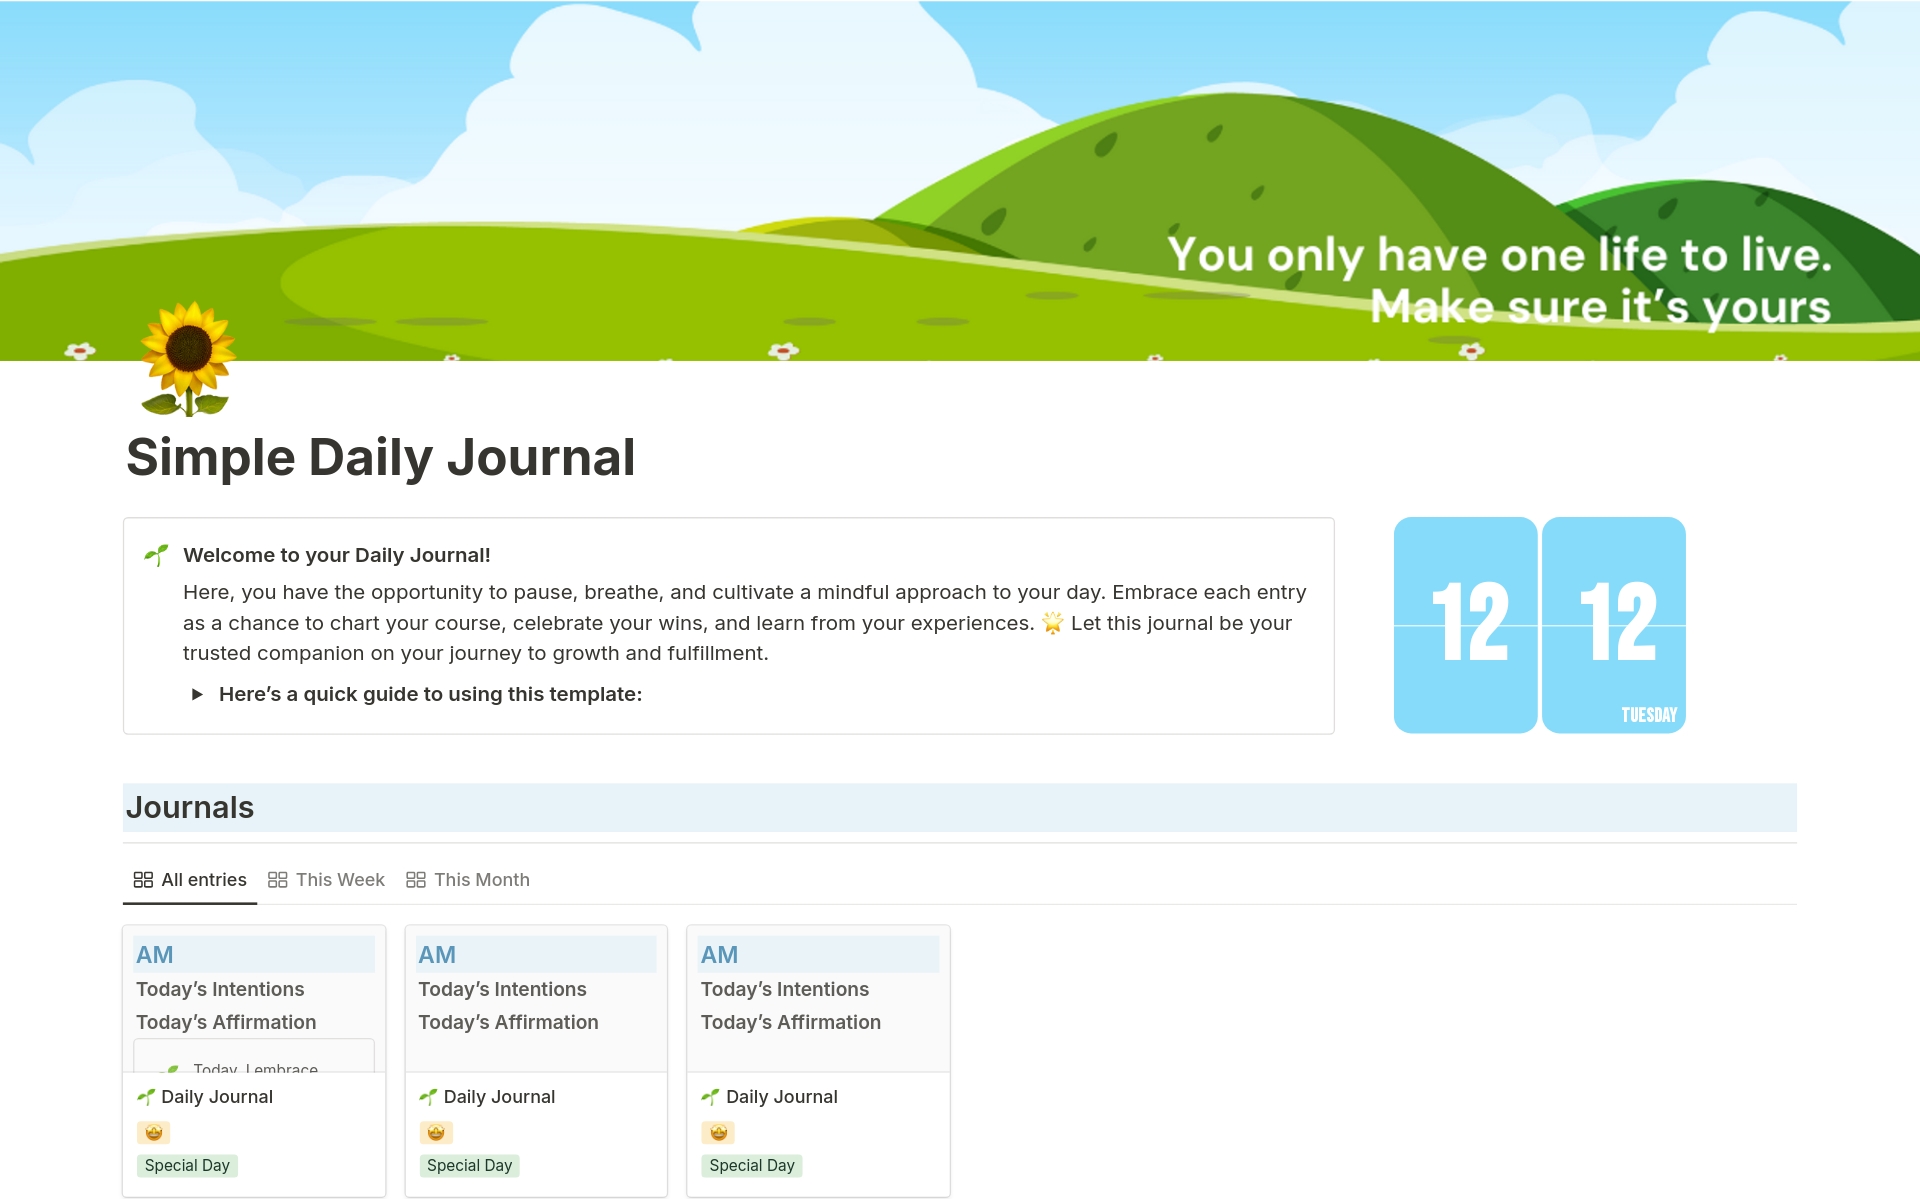 The daily journal template designed to help you organize your thoughts, set intentions, and reflect on your day. Customize it to fit your unique style and needs.